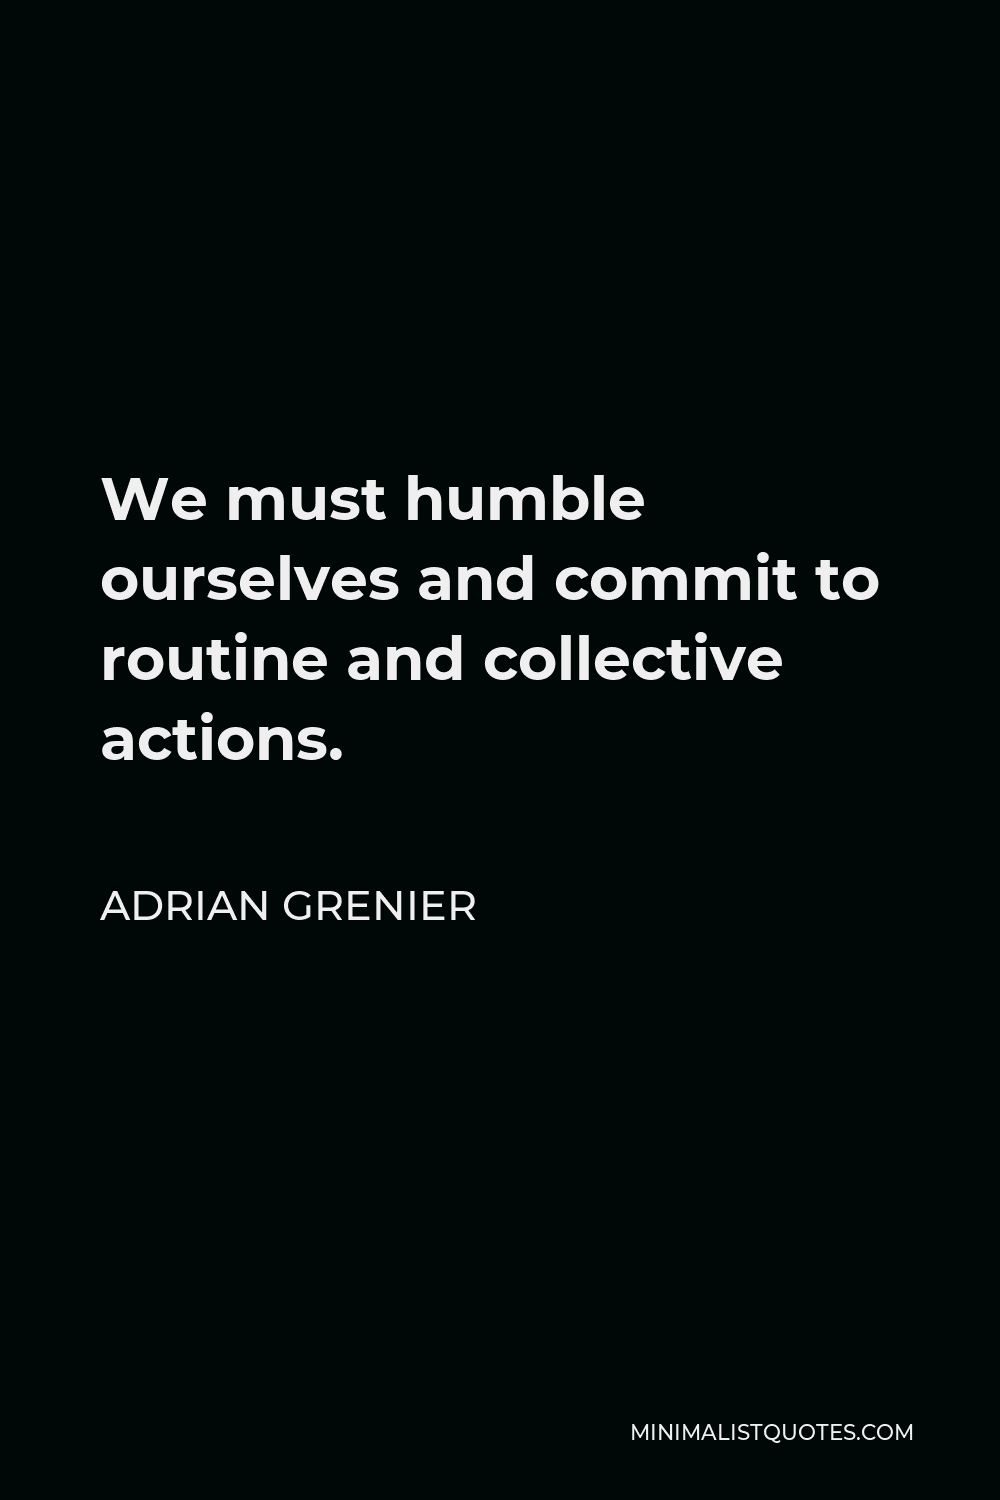 Adrian Grenier Quote - We must humble ourselves and commit to routine and collective actions.